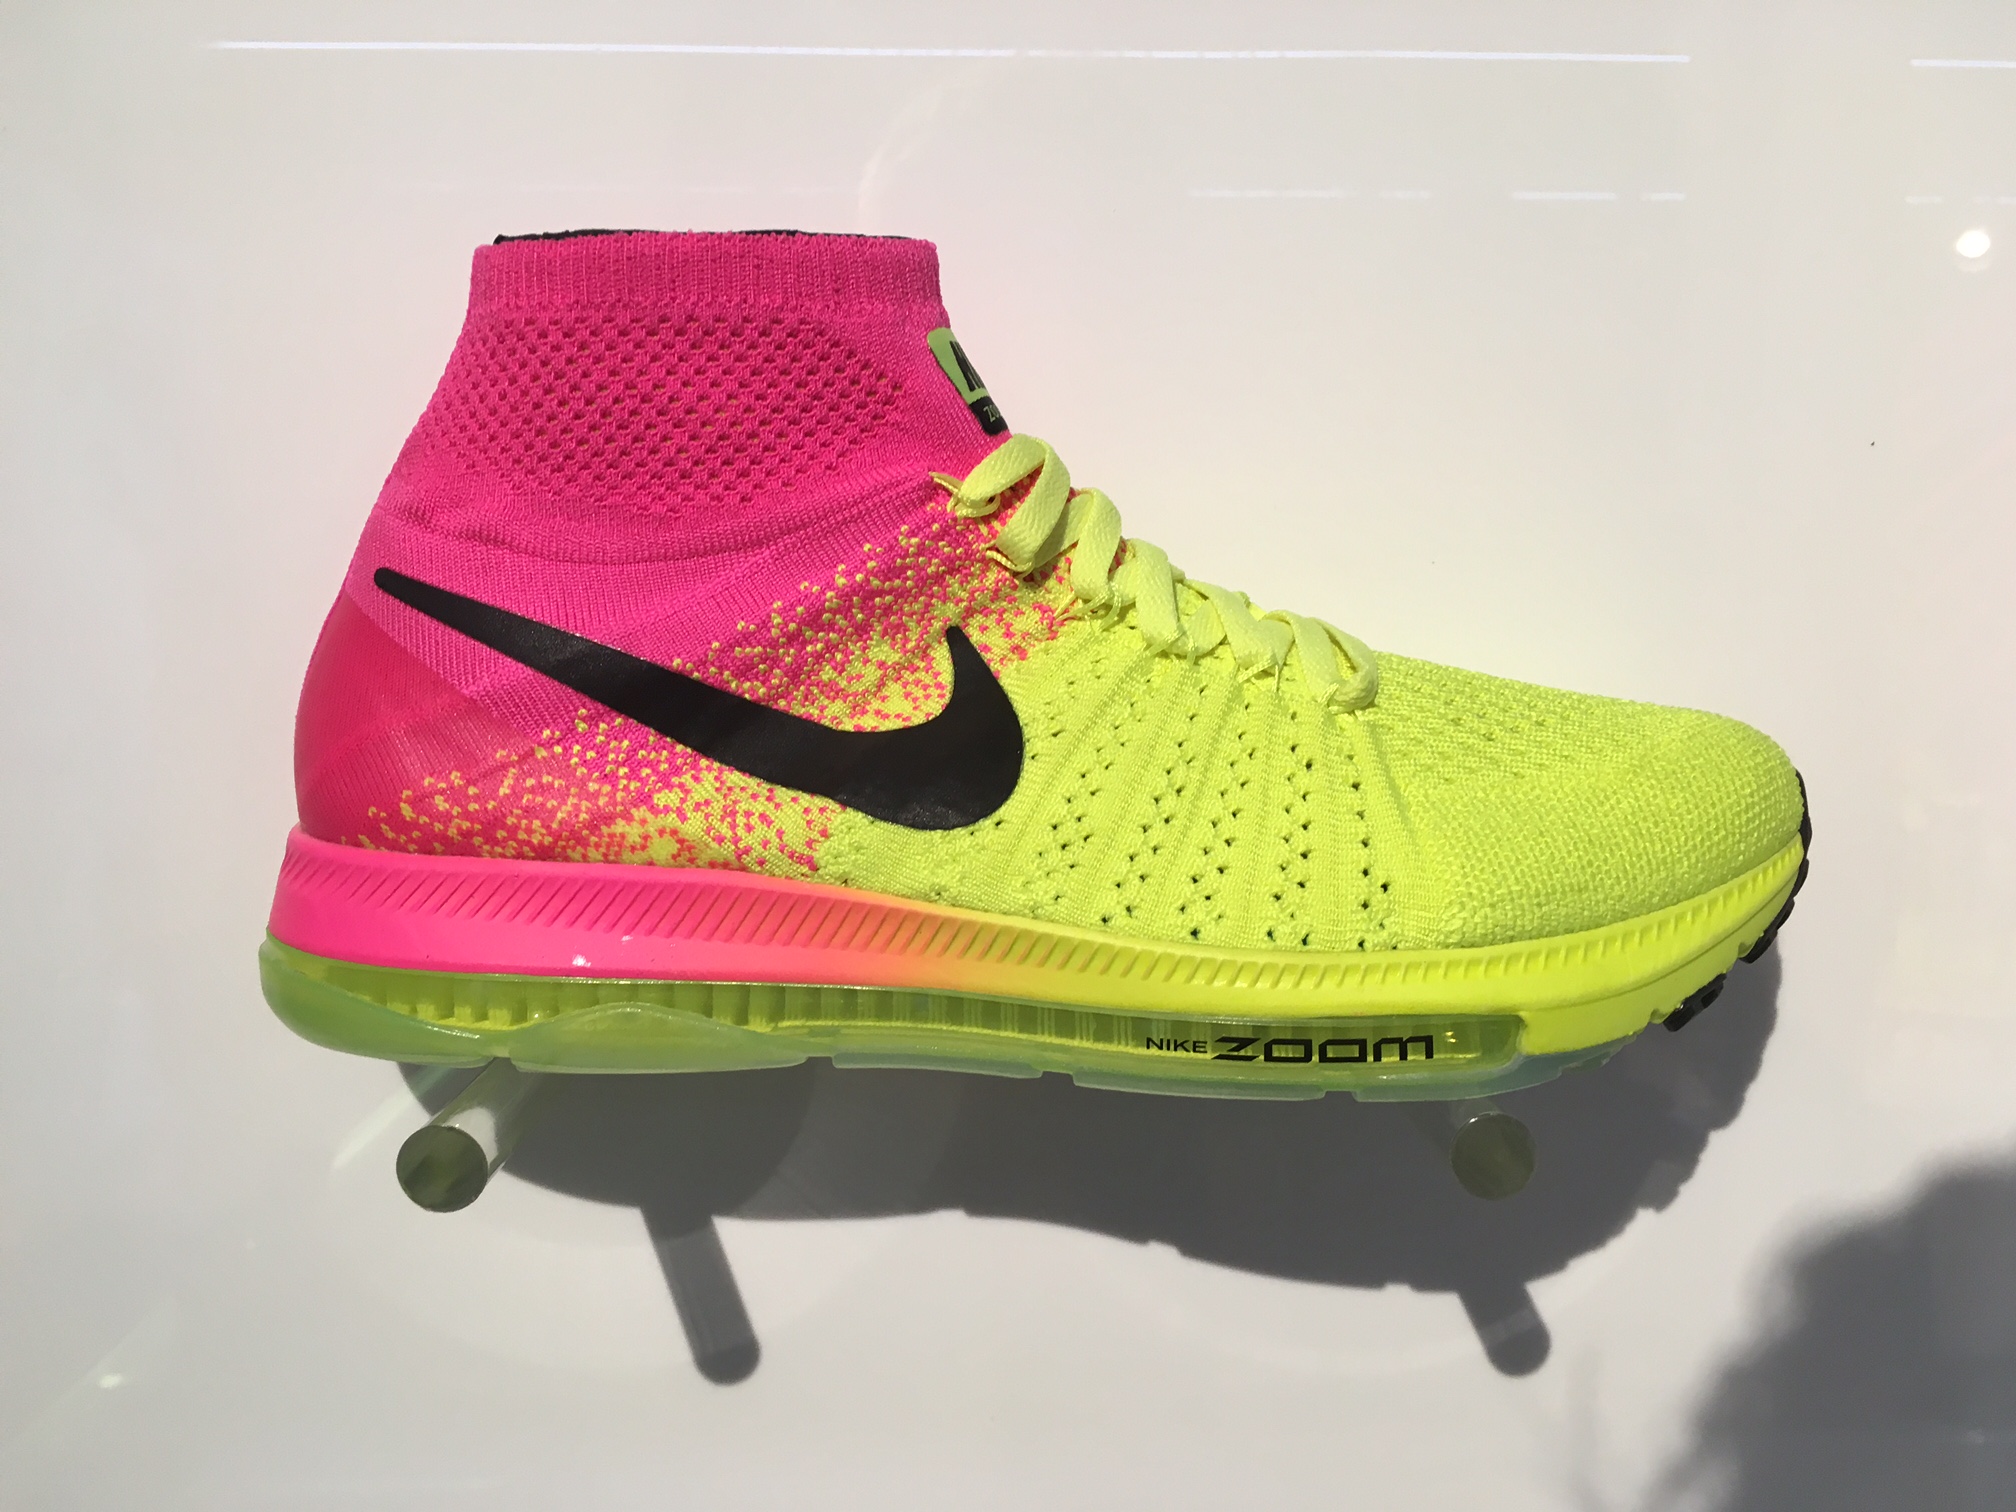 The Nike Zoom Out Flyknit will make you forget you knew about traditional - Canadian Running Magazine